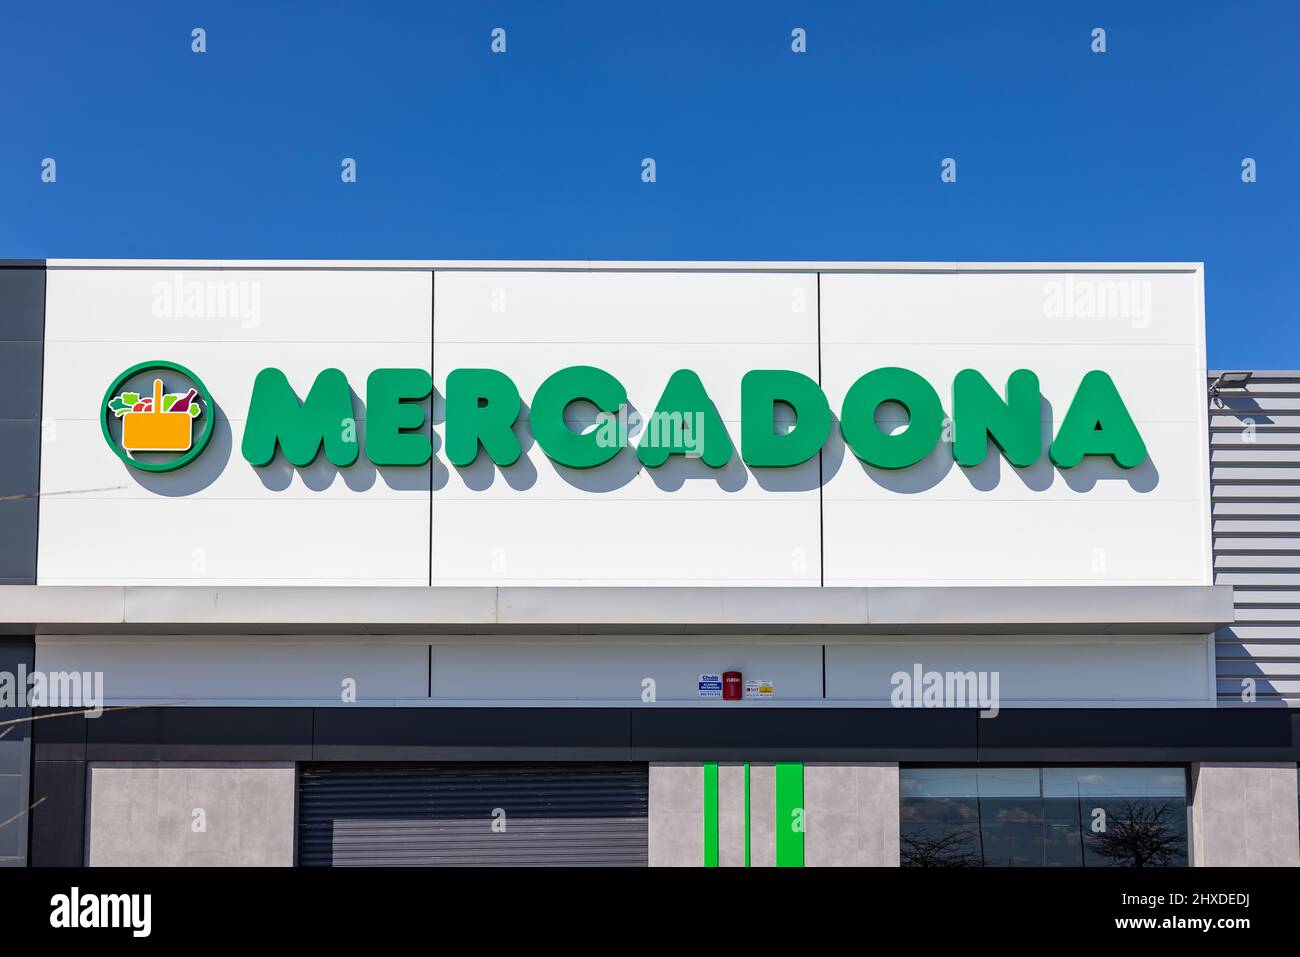 Mercadona High Resolution Stock Photography and Images - Alamy